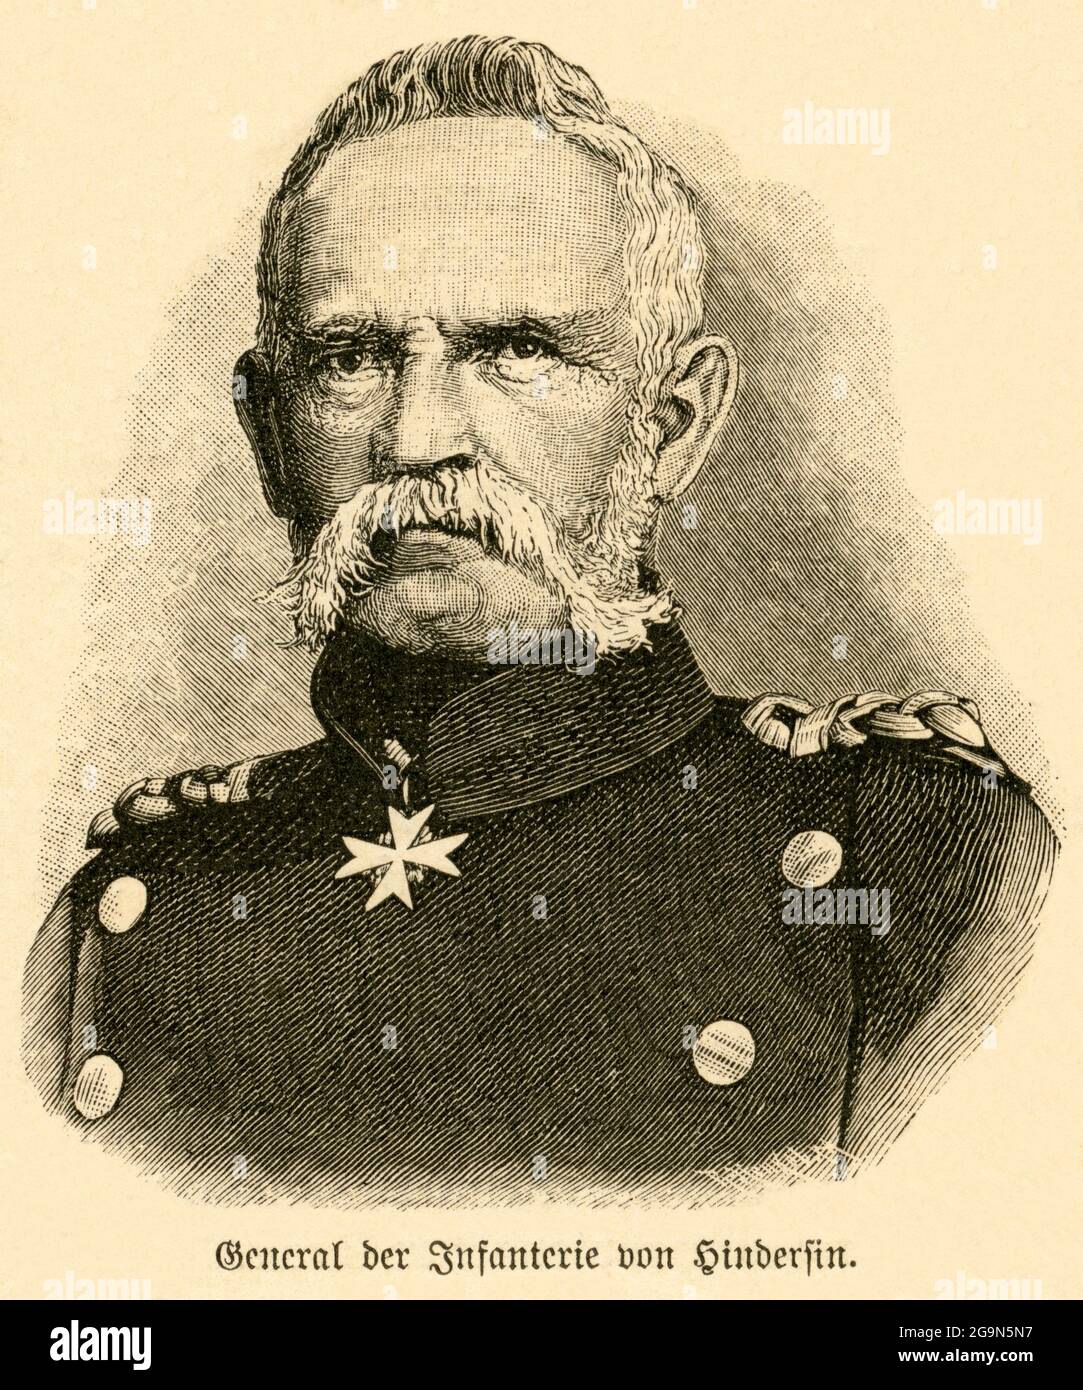 Europe, Germany, Saxony-Anhalt, Wernigerode, Gustav Eduard von Hindersin, Prussian general of infantry, ARTIST'S COPYRIGHT HAS NOT TO BE CLEARED Stock Photo